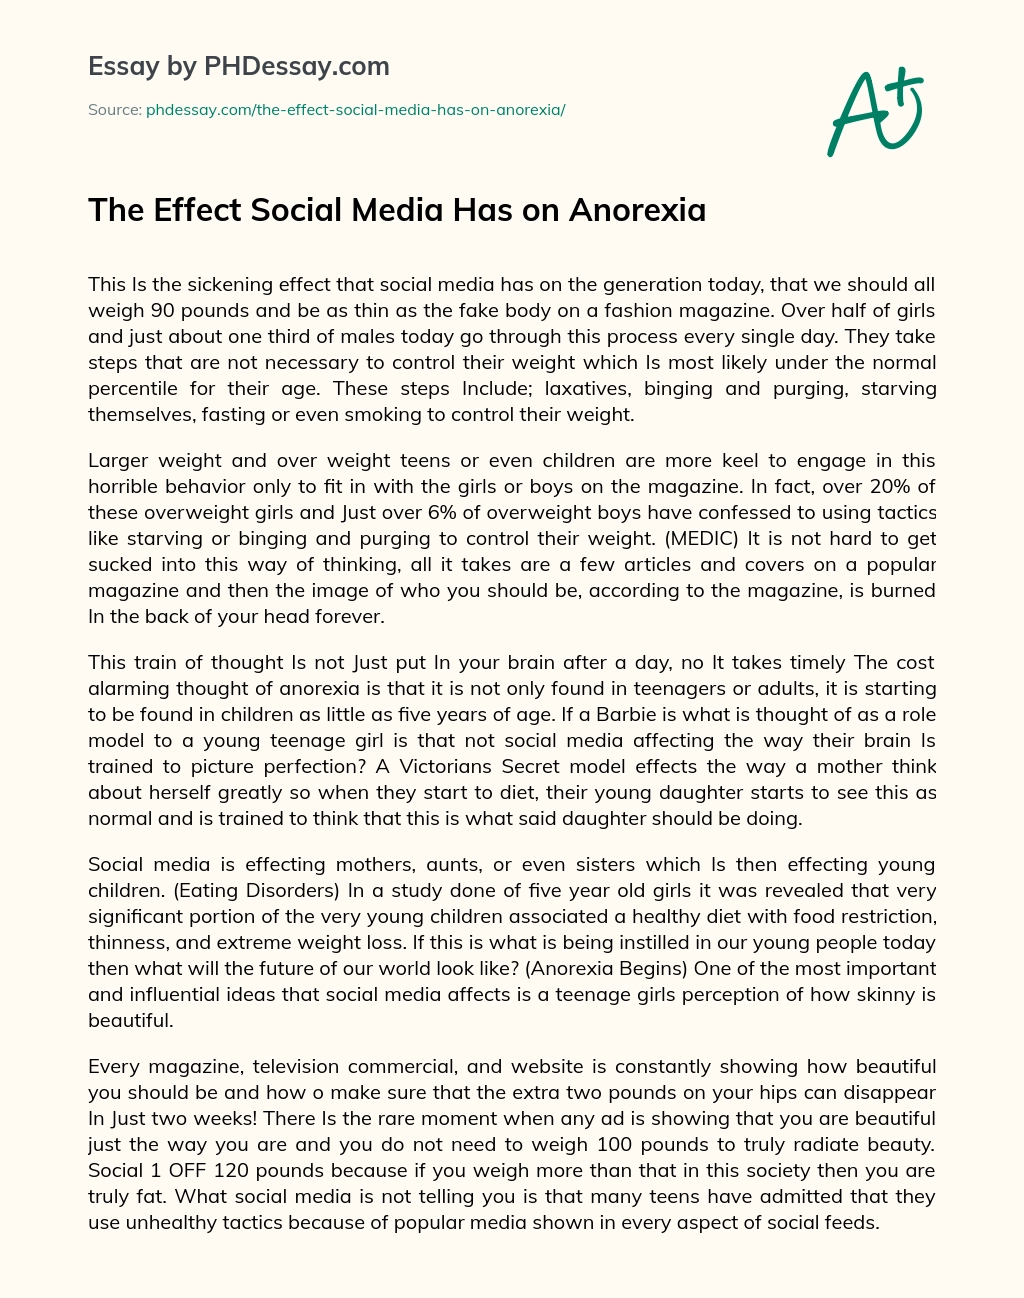 The Effect Social Media Has on Anorexia essay